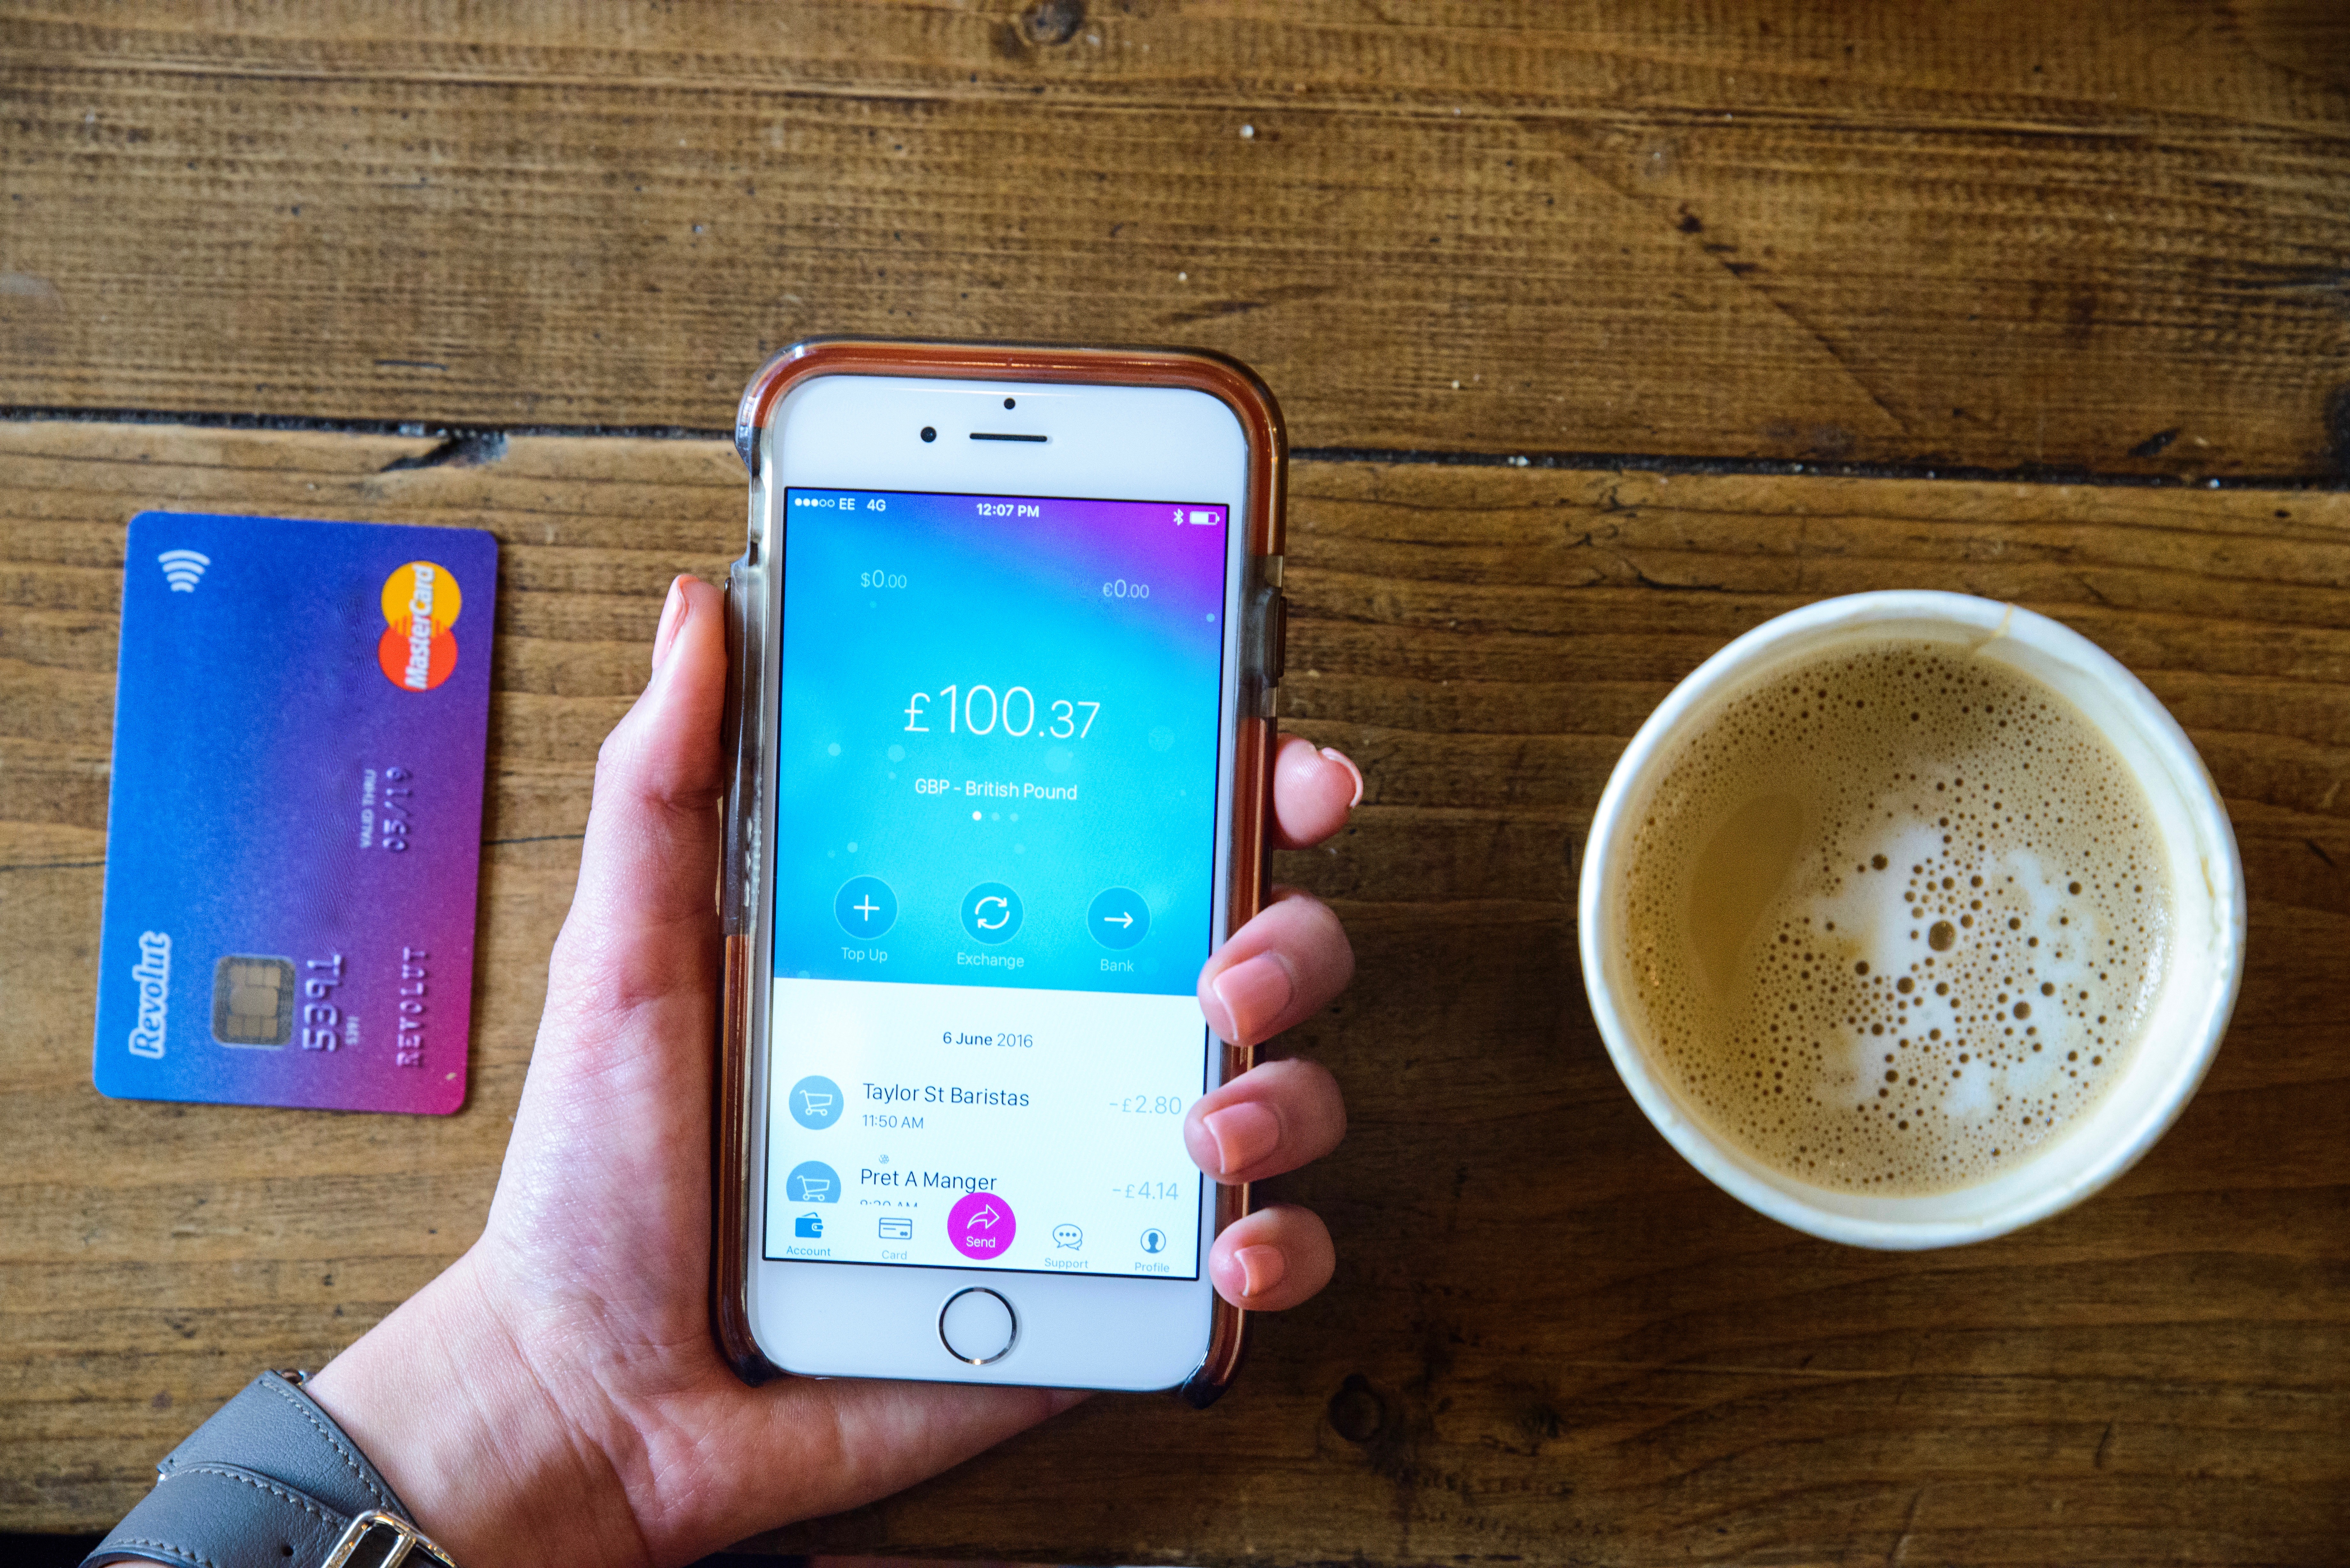 Revolut launches cell phone insurance in the U.K.